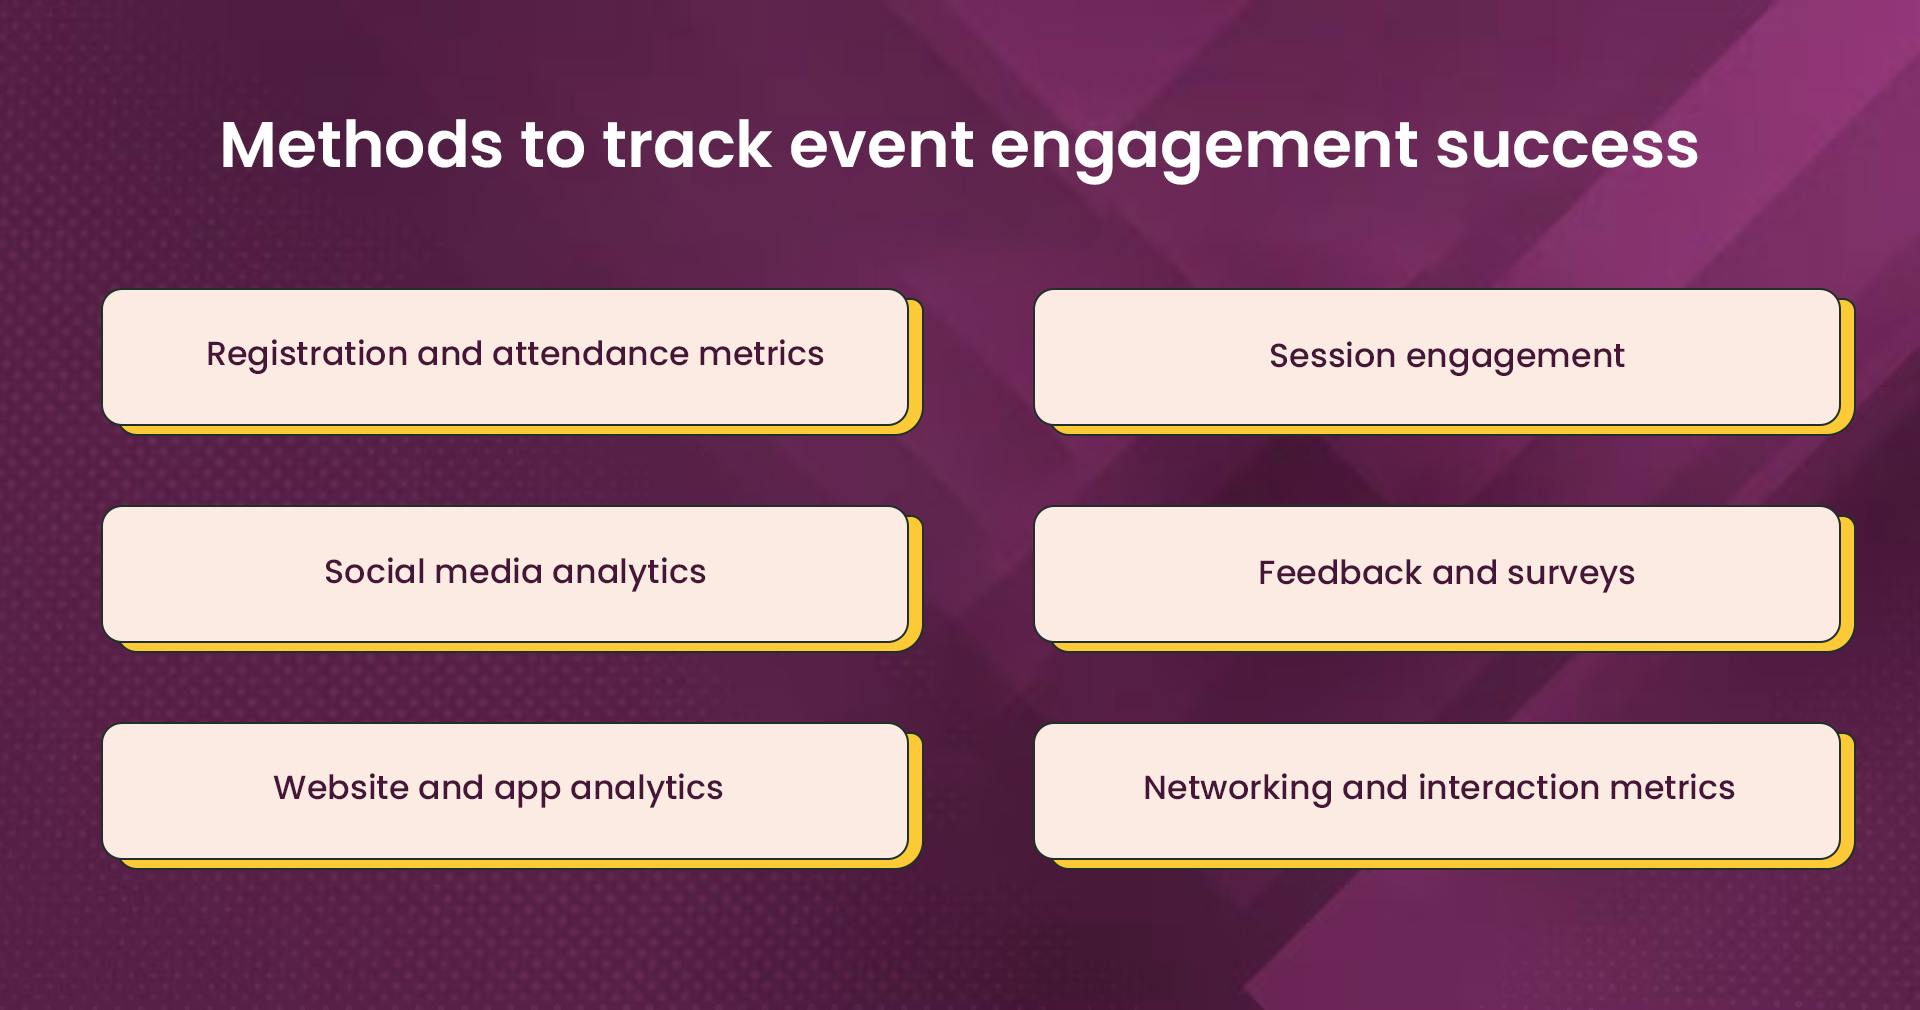 Measuring and analyzing event engagement